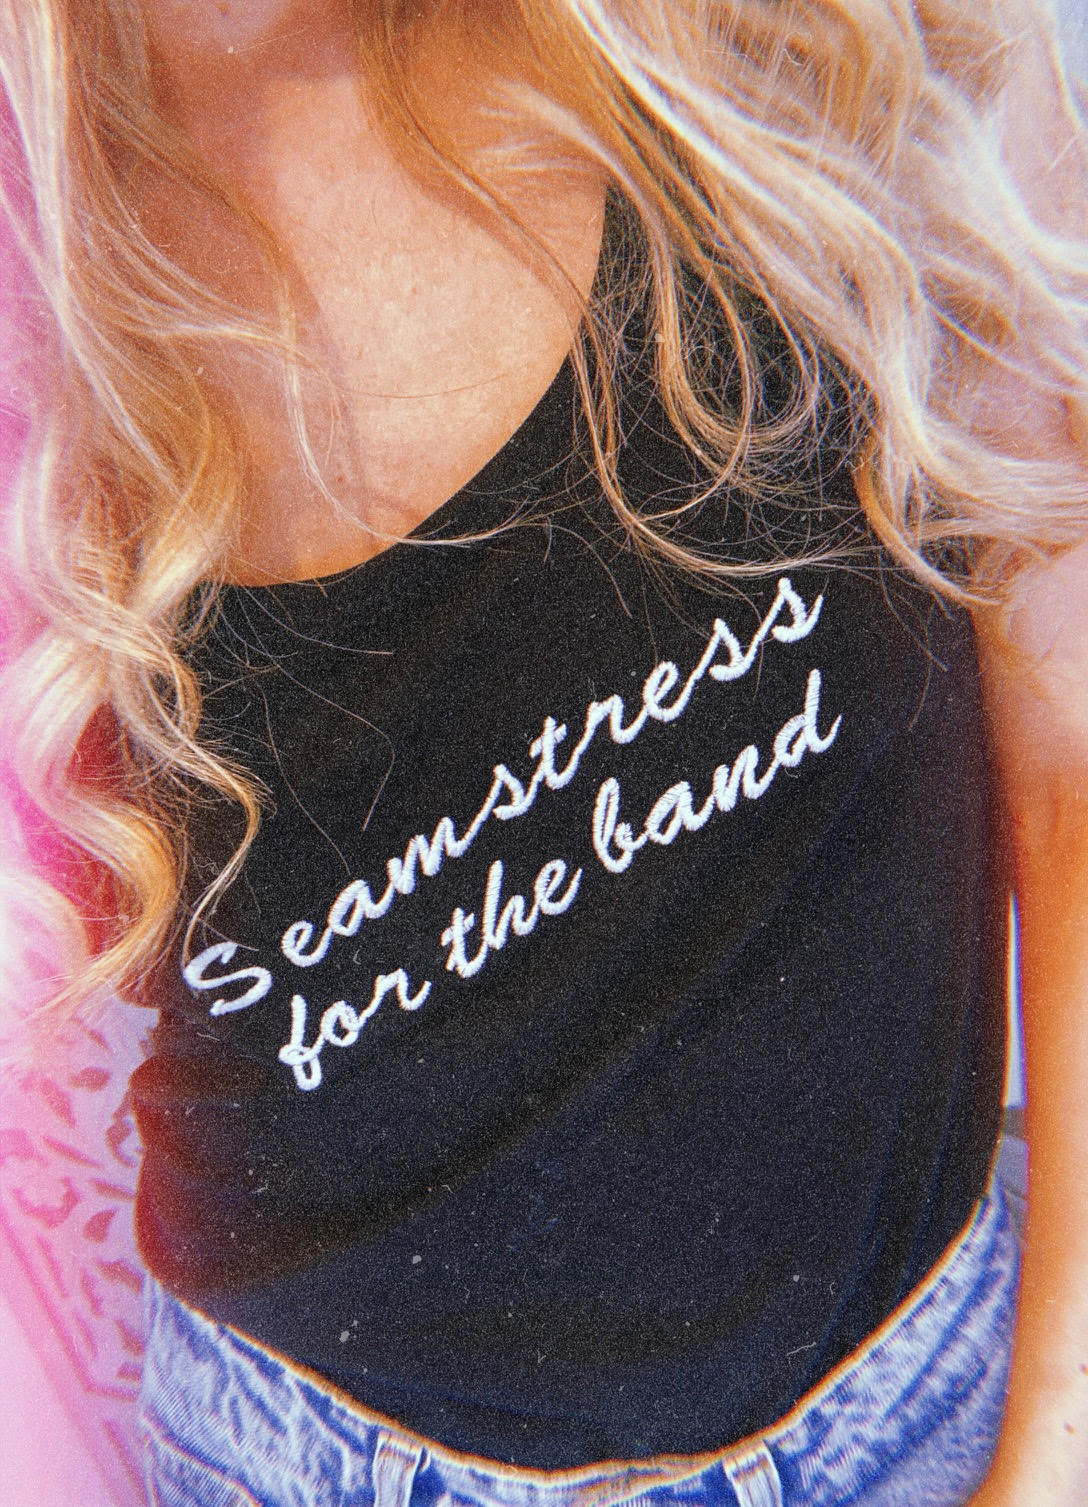 SAMPLE SALE 'SEAMSTRESS FOR THE BAND' EMBROIDERED WOMEN'S 100% ORGANIC COTTON TANK TOP VEST (SIZE MEDIUM)